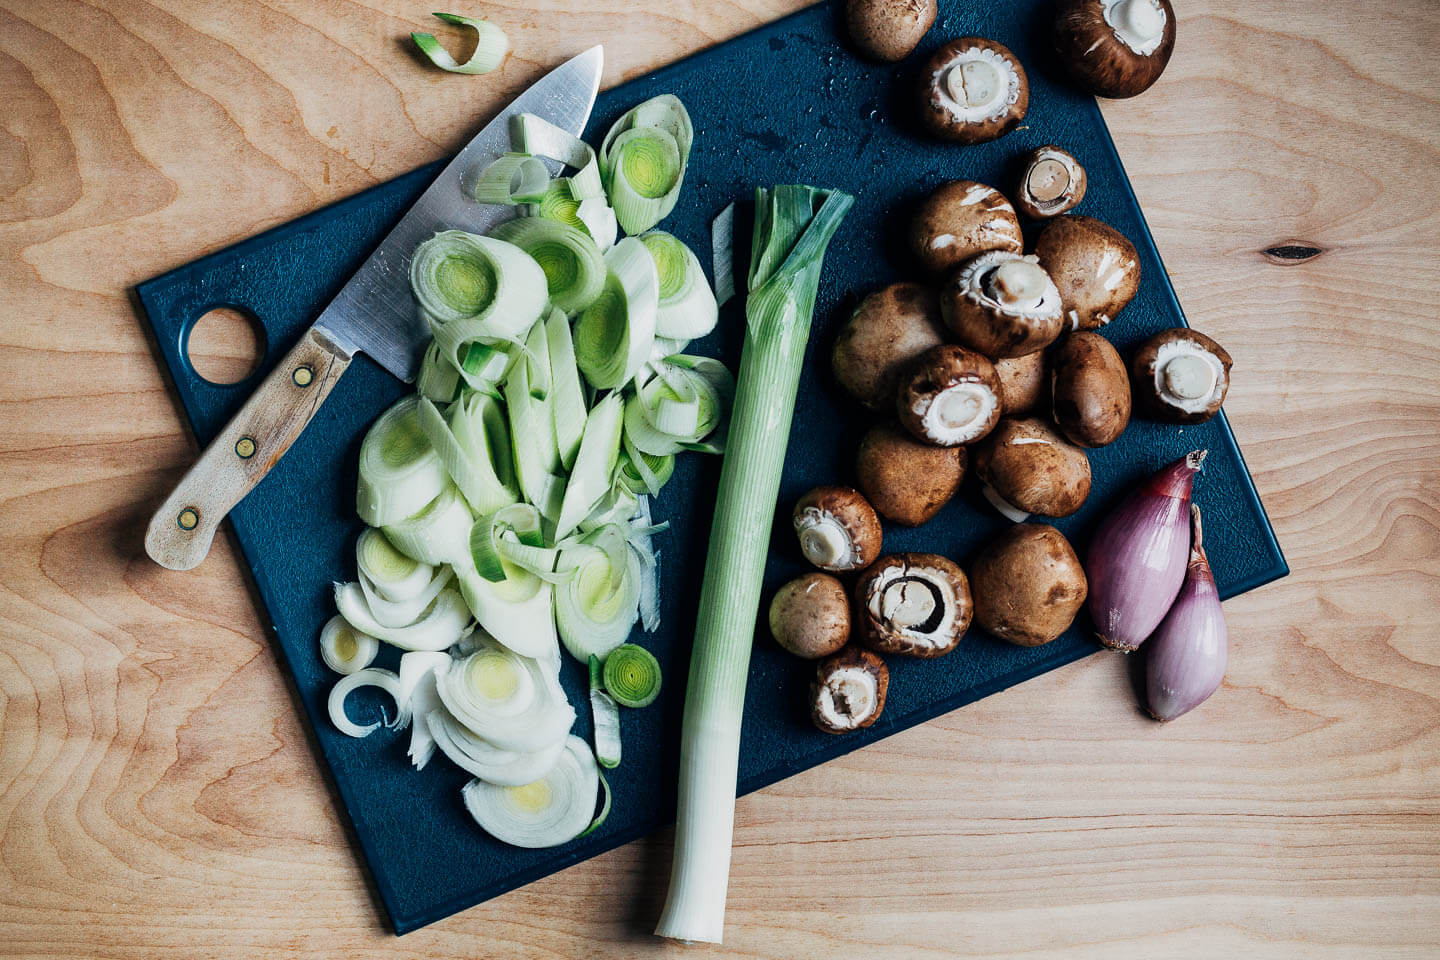 Cutting board with leeks and mushrooms